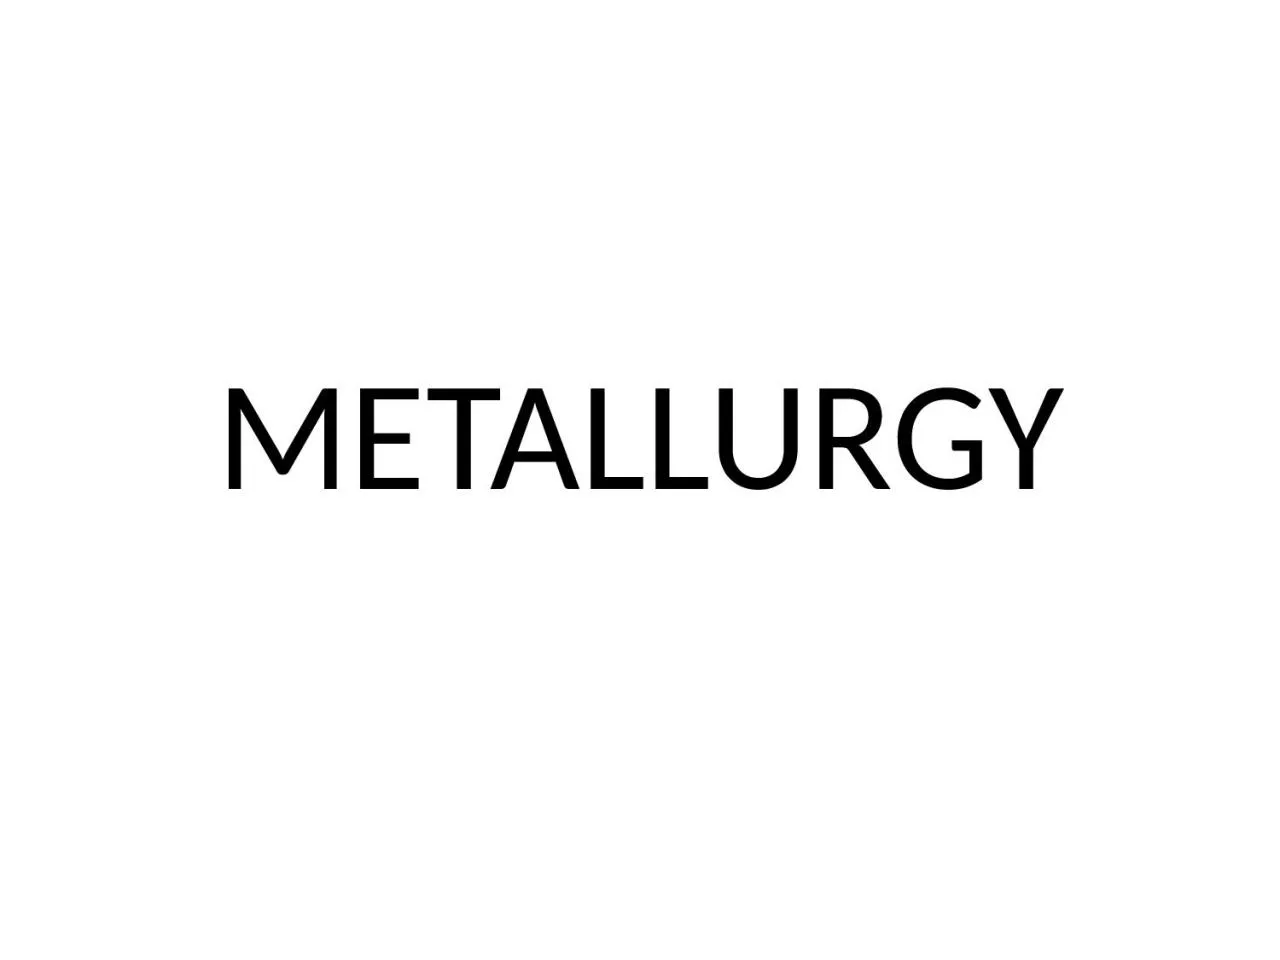 METALLURGY   The extraction of metals from their